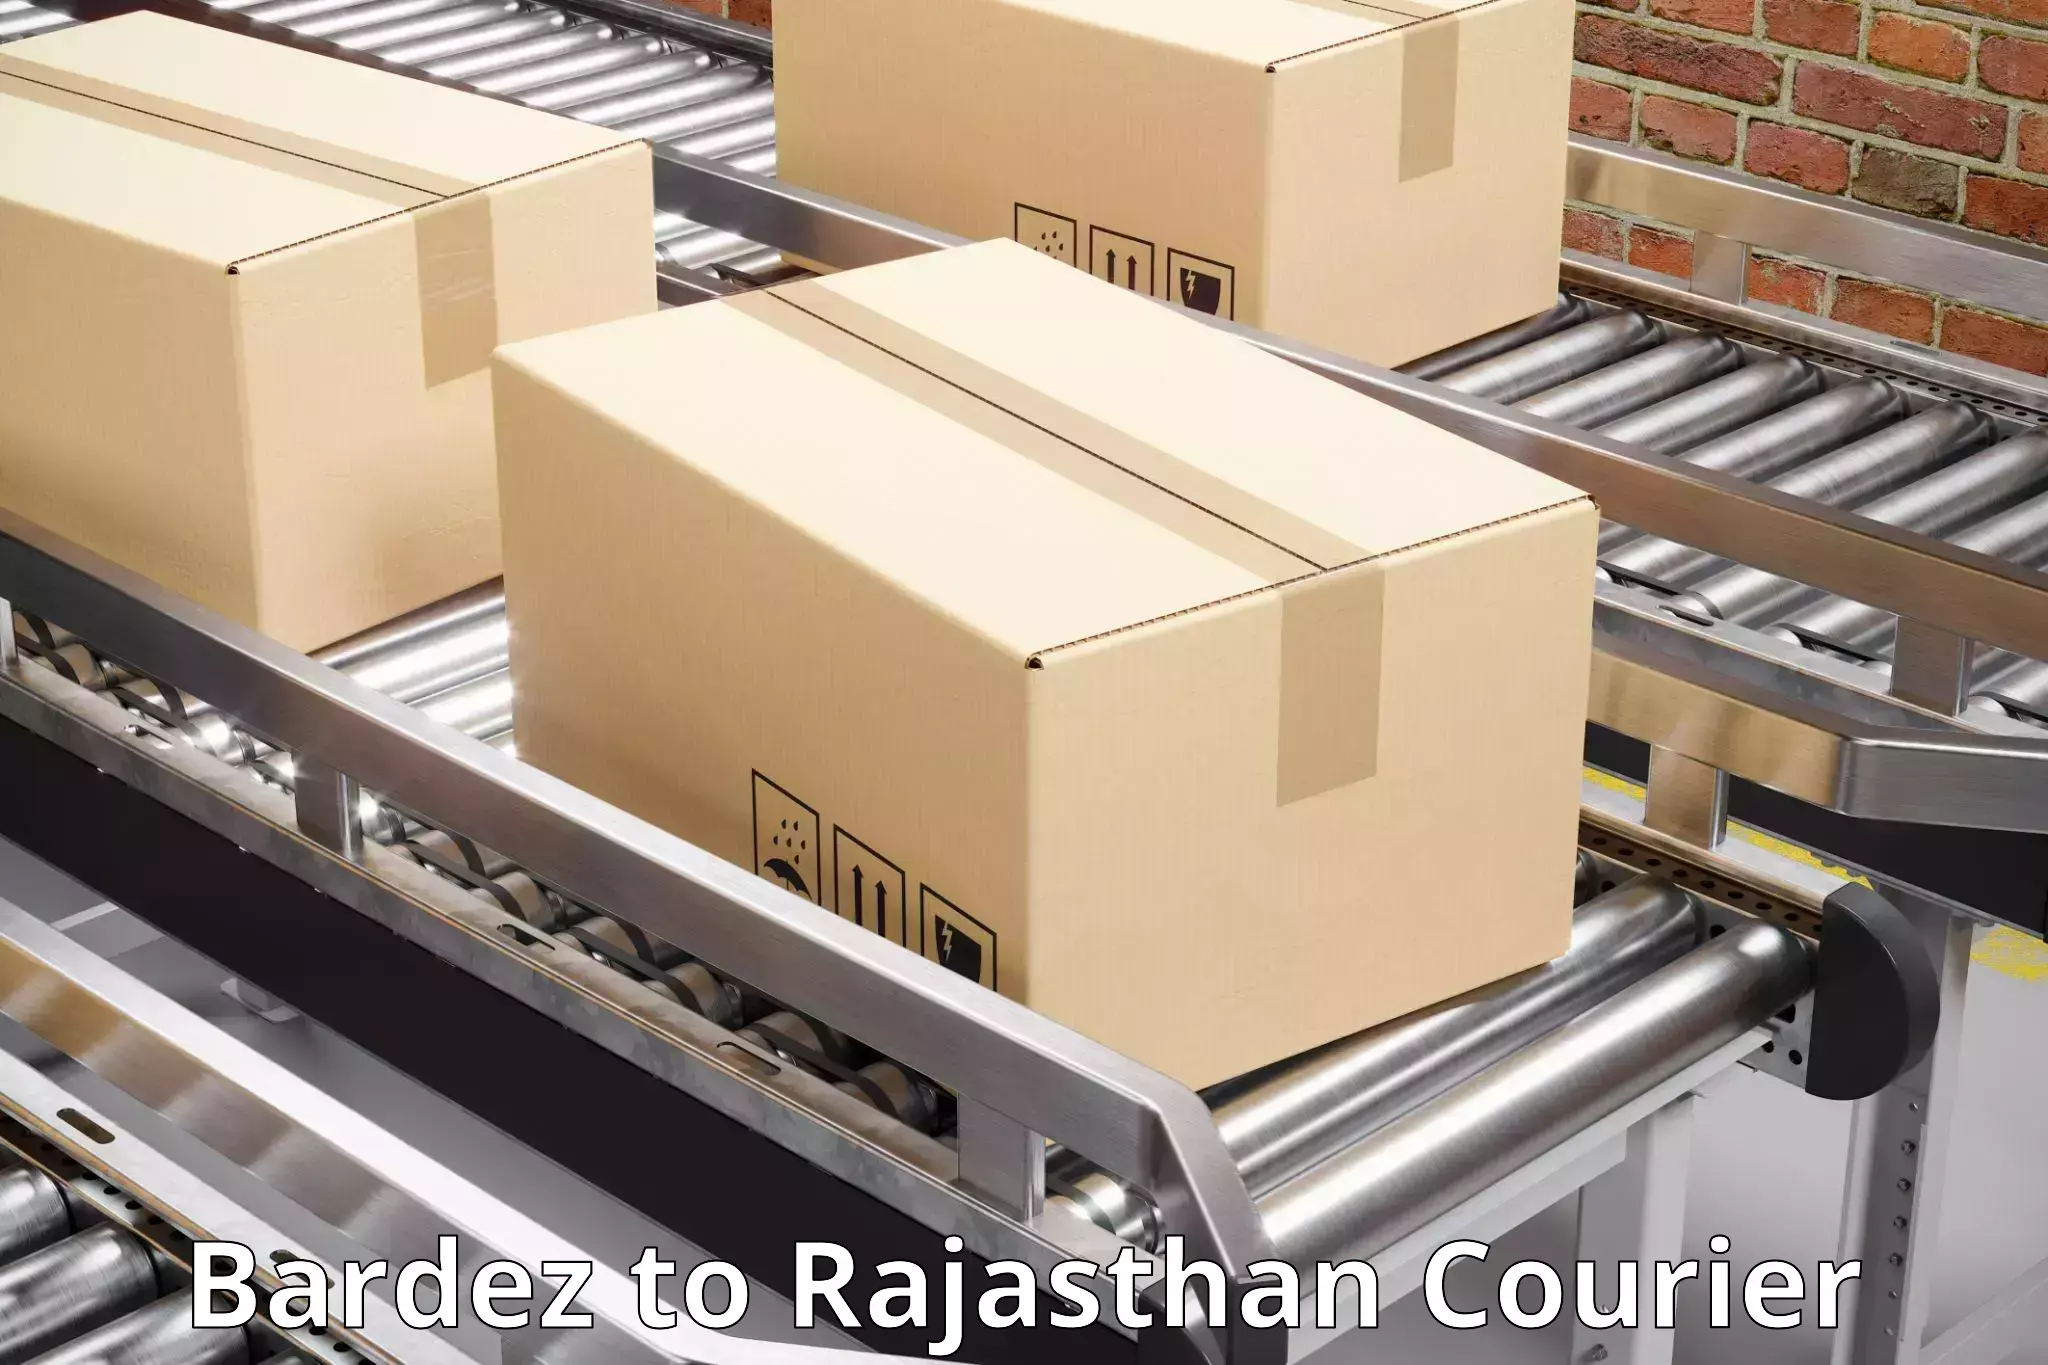 Easy return solutions Bardez to Dholpur